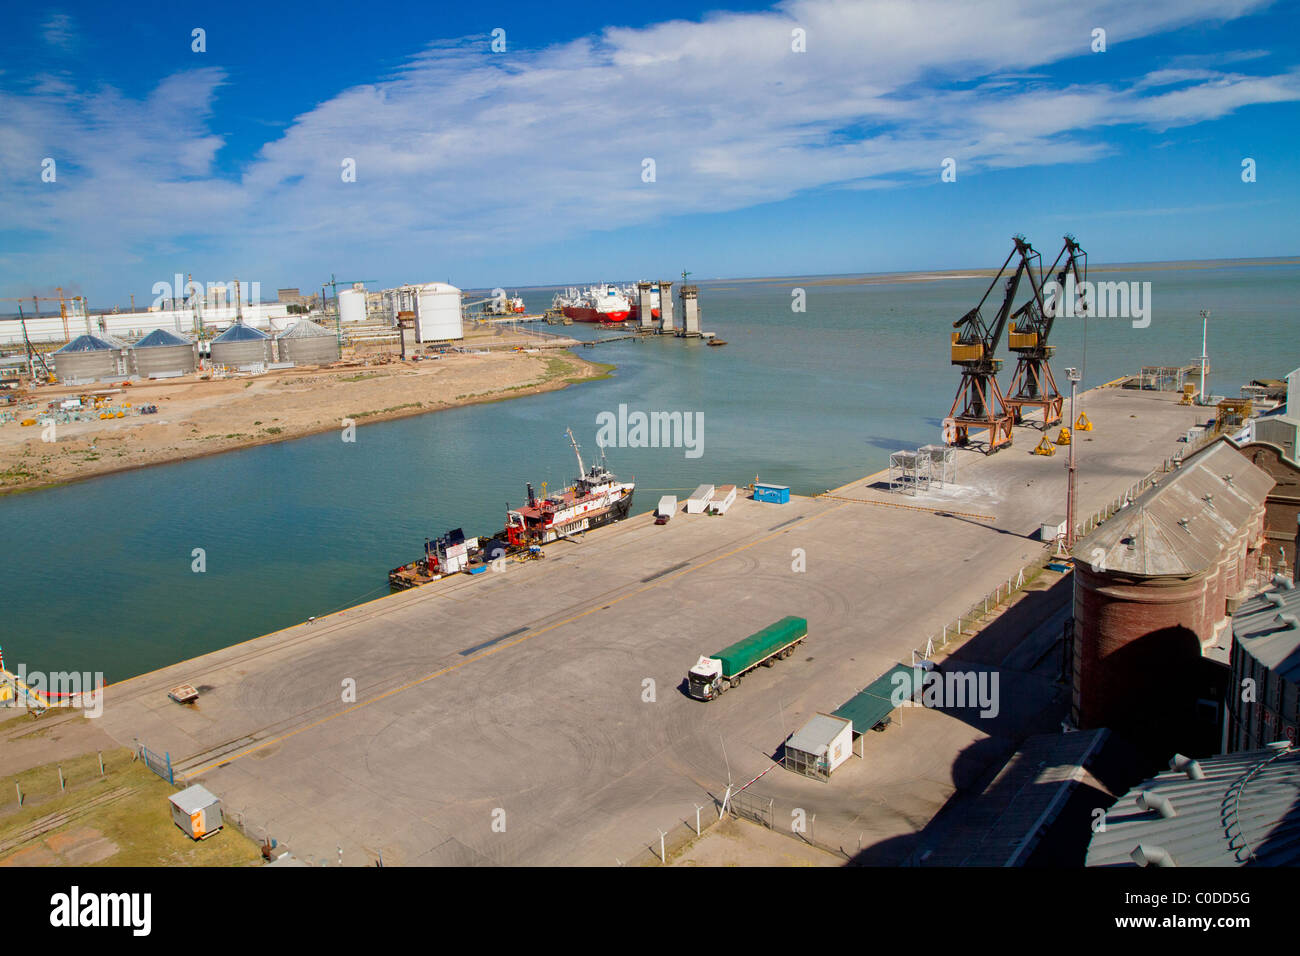 BAHIA BLANCA, ARGENTINA, 2010: Port of Ingeniero White - now is a major trading port of Argentina, deepest port in the country. Stock Photo